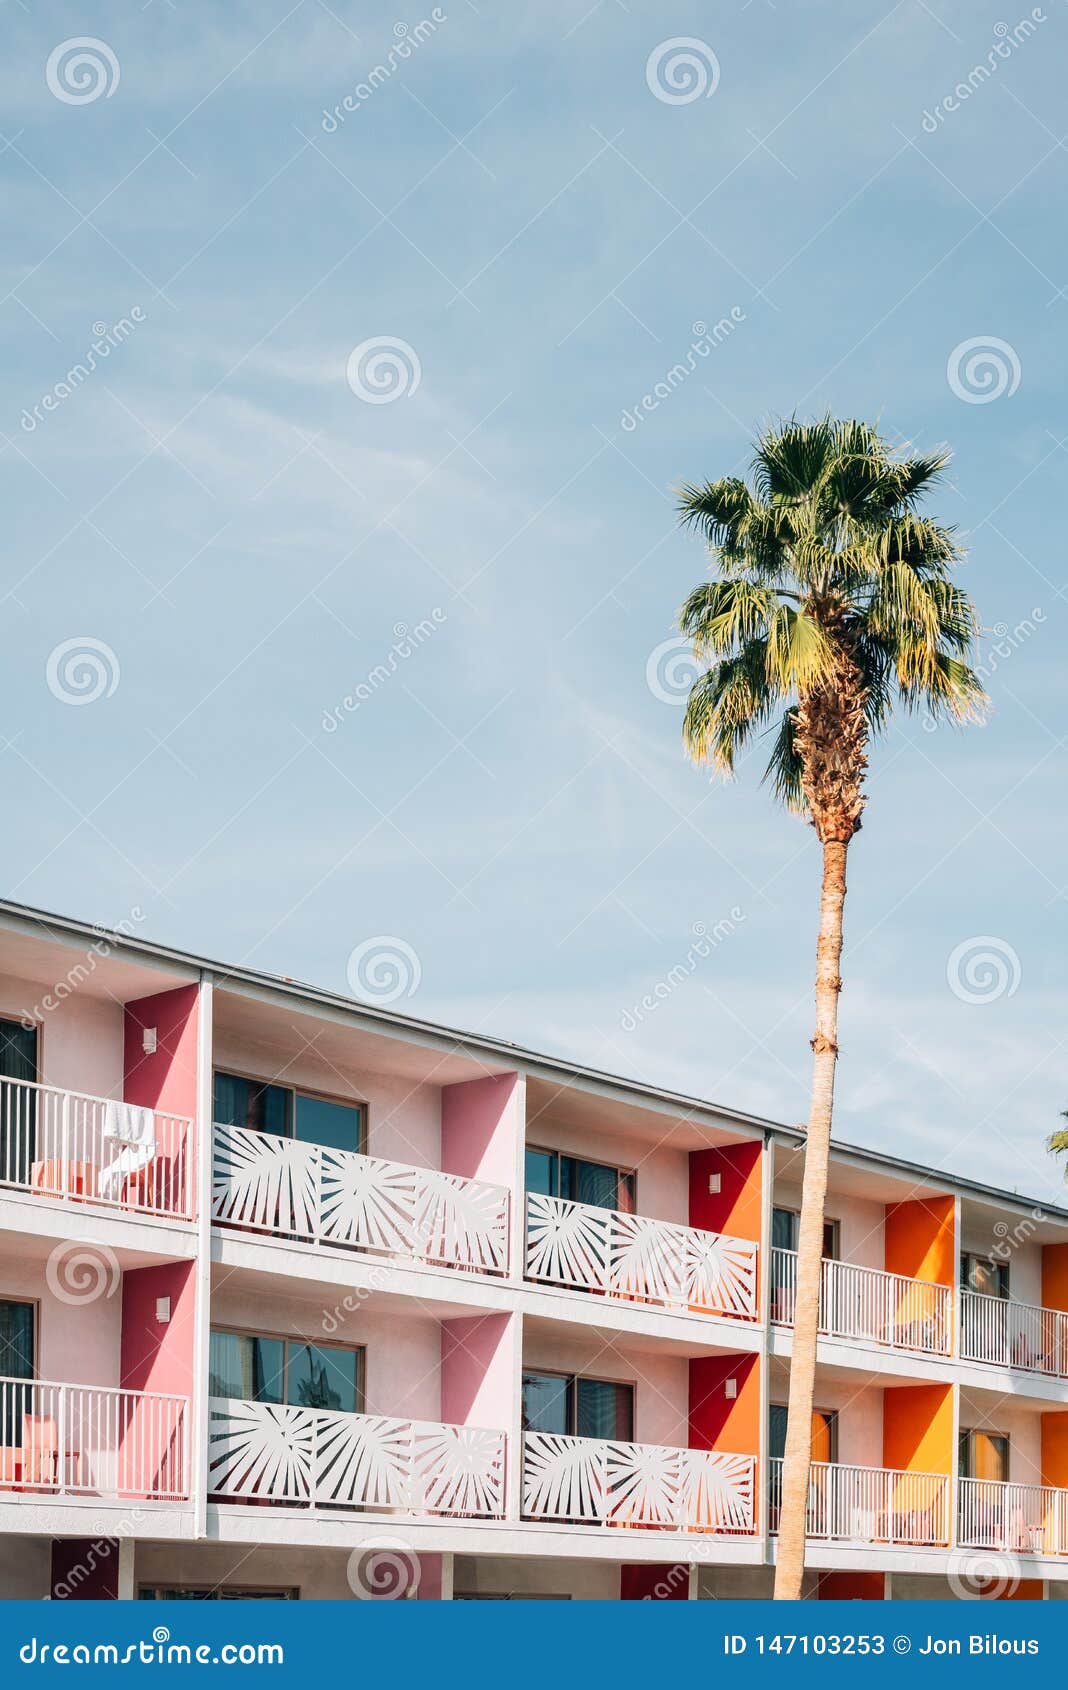 palm tree and colorful hotel with balconies in palm springs, california